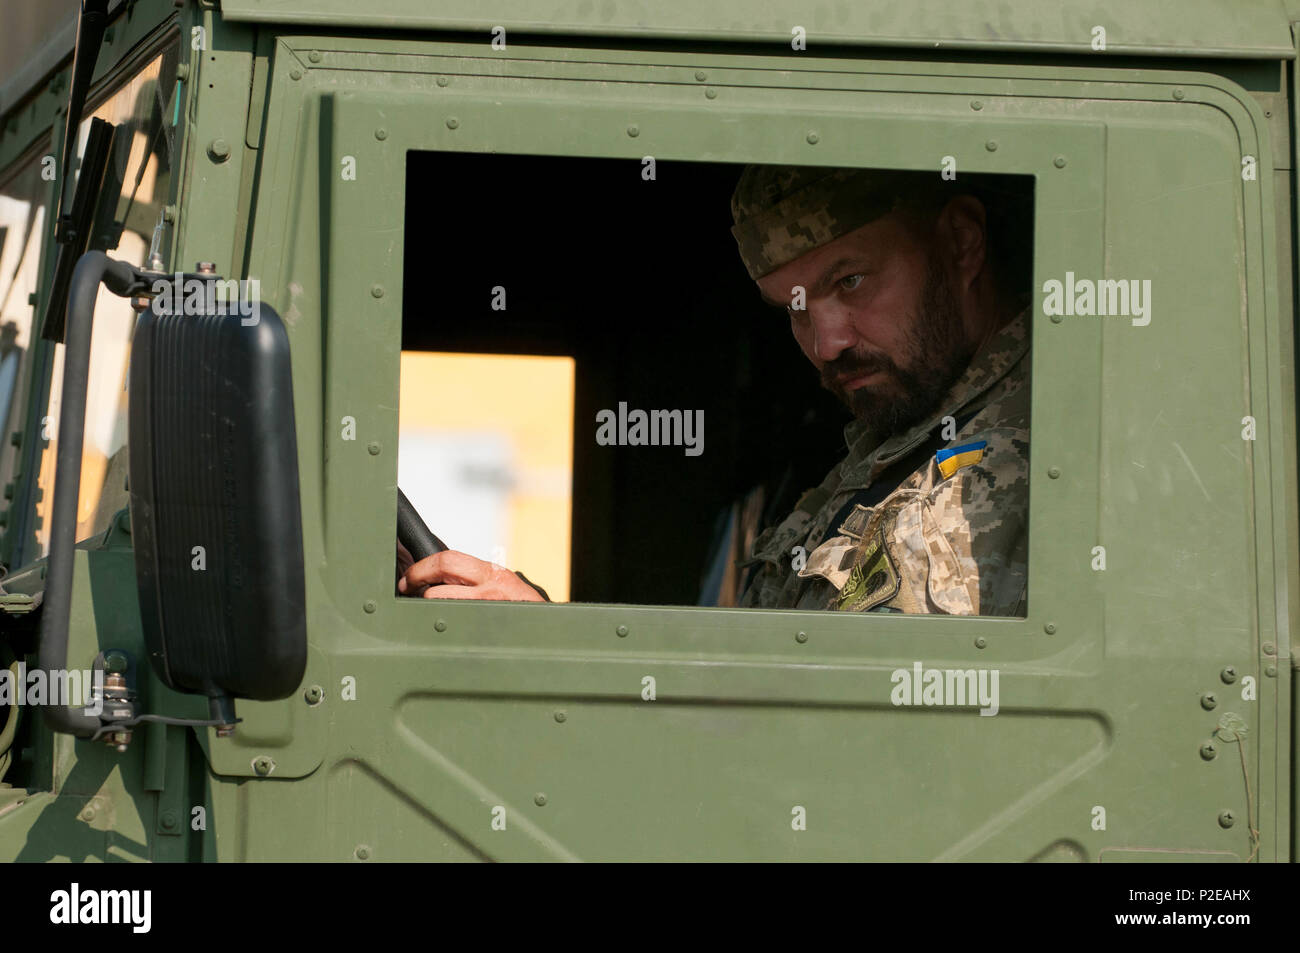 A Ukrainian Solider watches for hand signals during a ground guide exercise  of field litter ambulance familiarization on the driving range at Yavoriv  Training Area, Ukraine on Sep. 9, 2016. A team